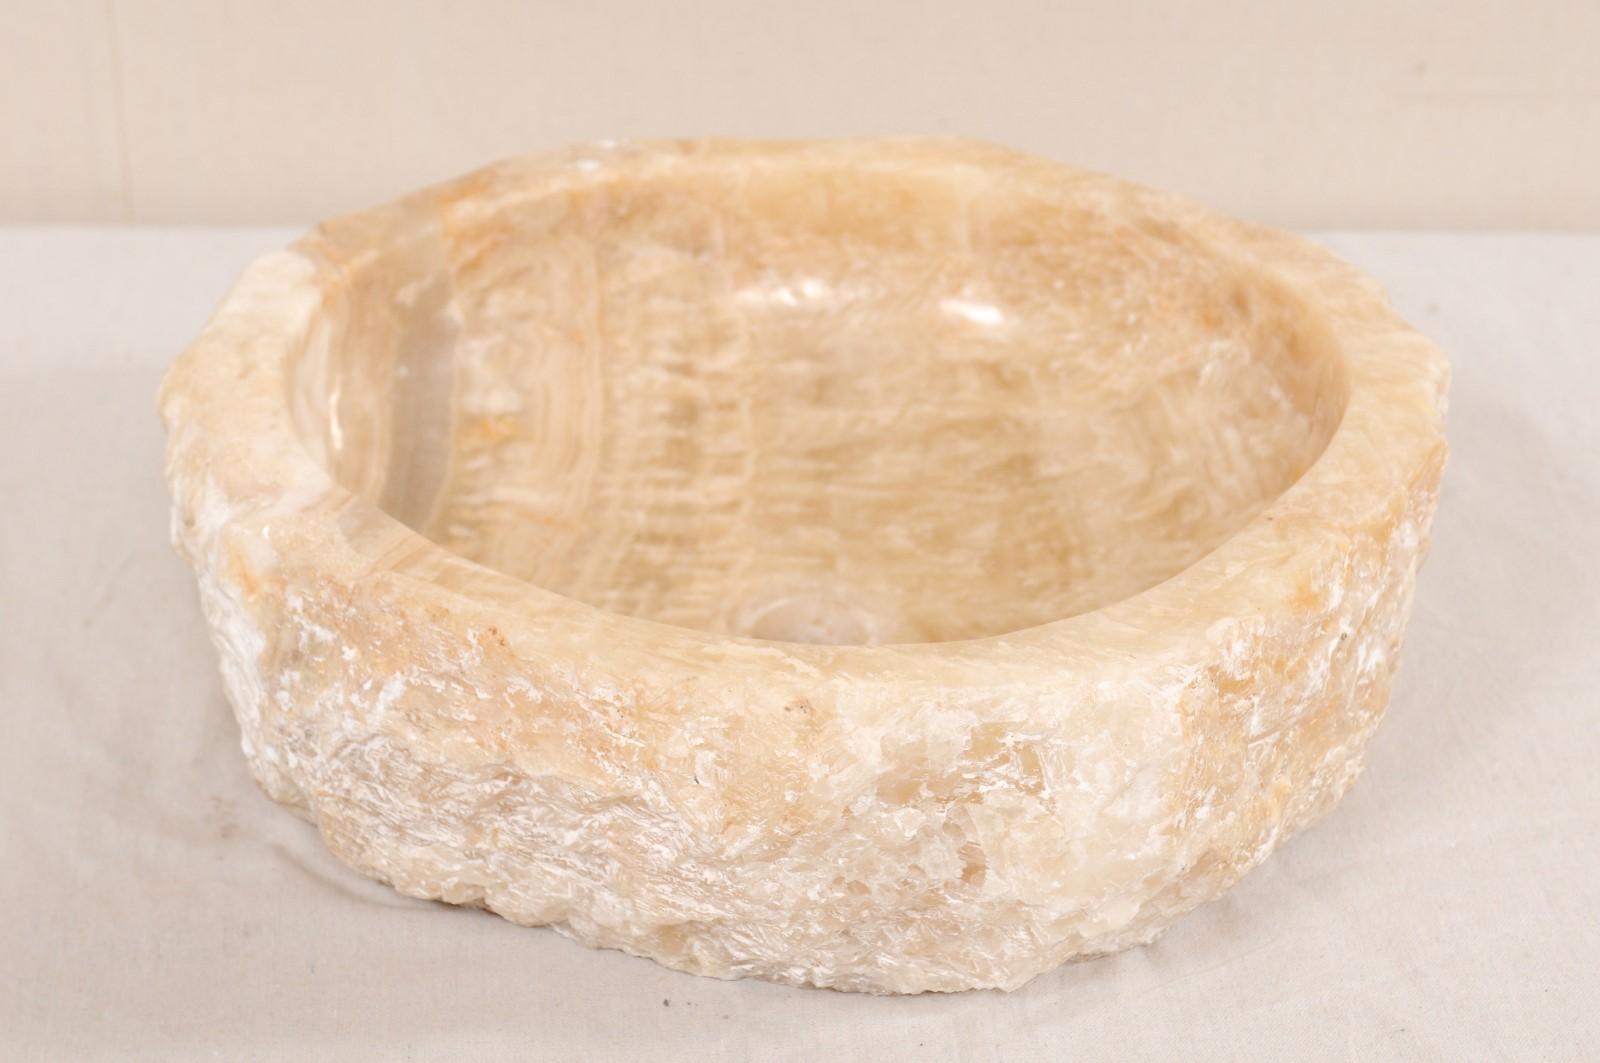 Polished Round Onyx Sink Basin in Cream Color For Sale